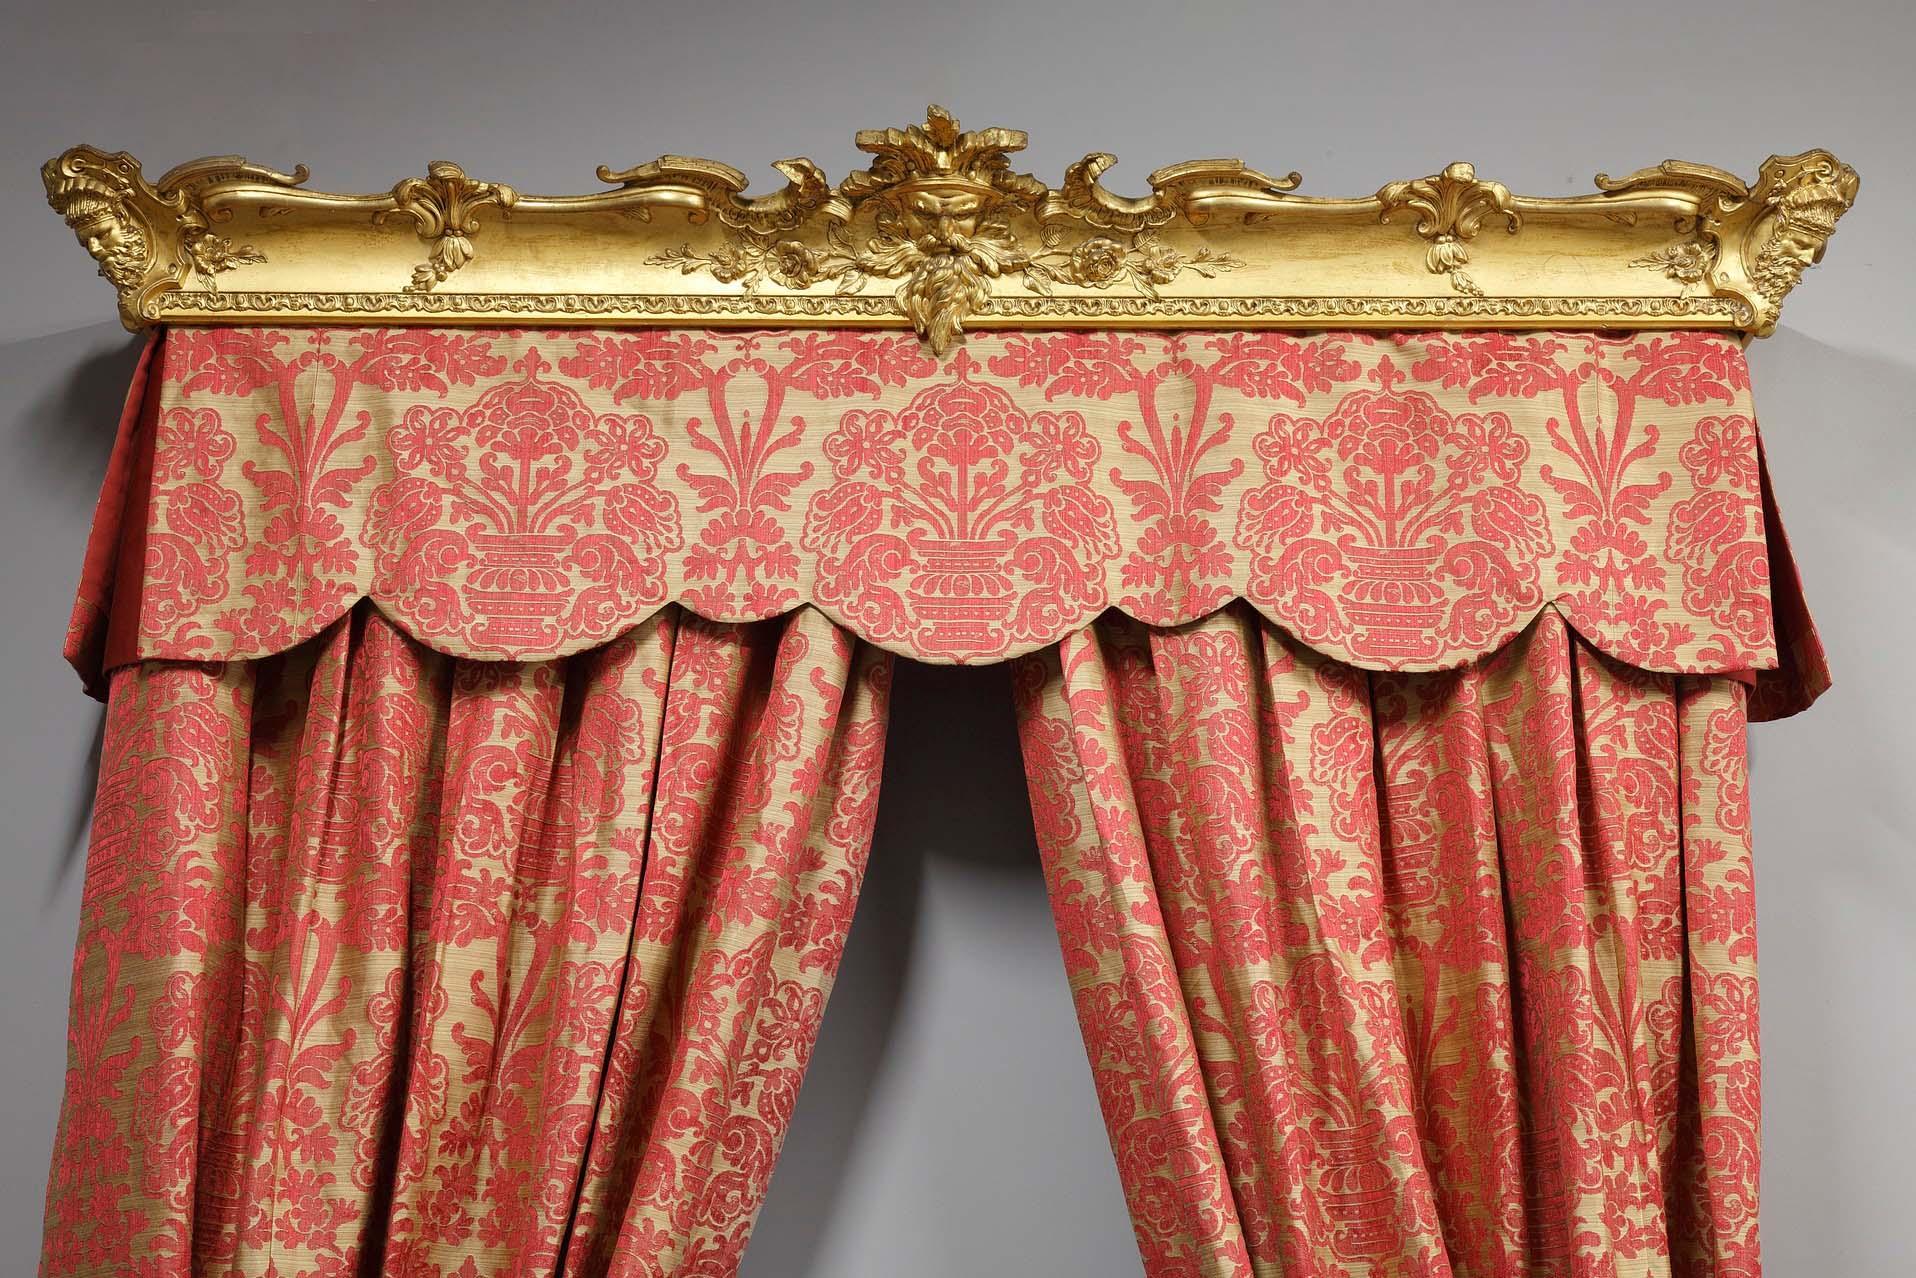 French Two Pairs of Fadini-Borghi Curtains and Their Valances Topped by a Gilded Wood